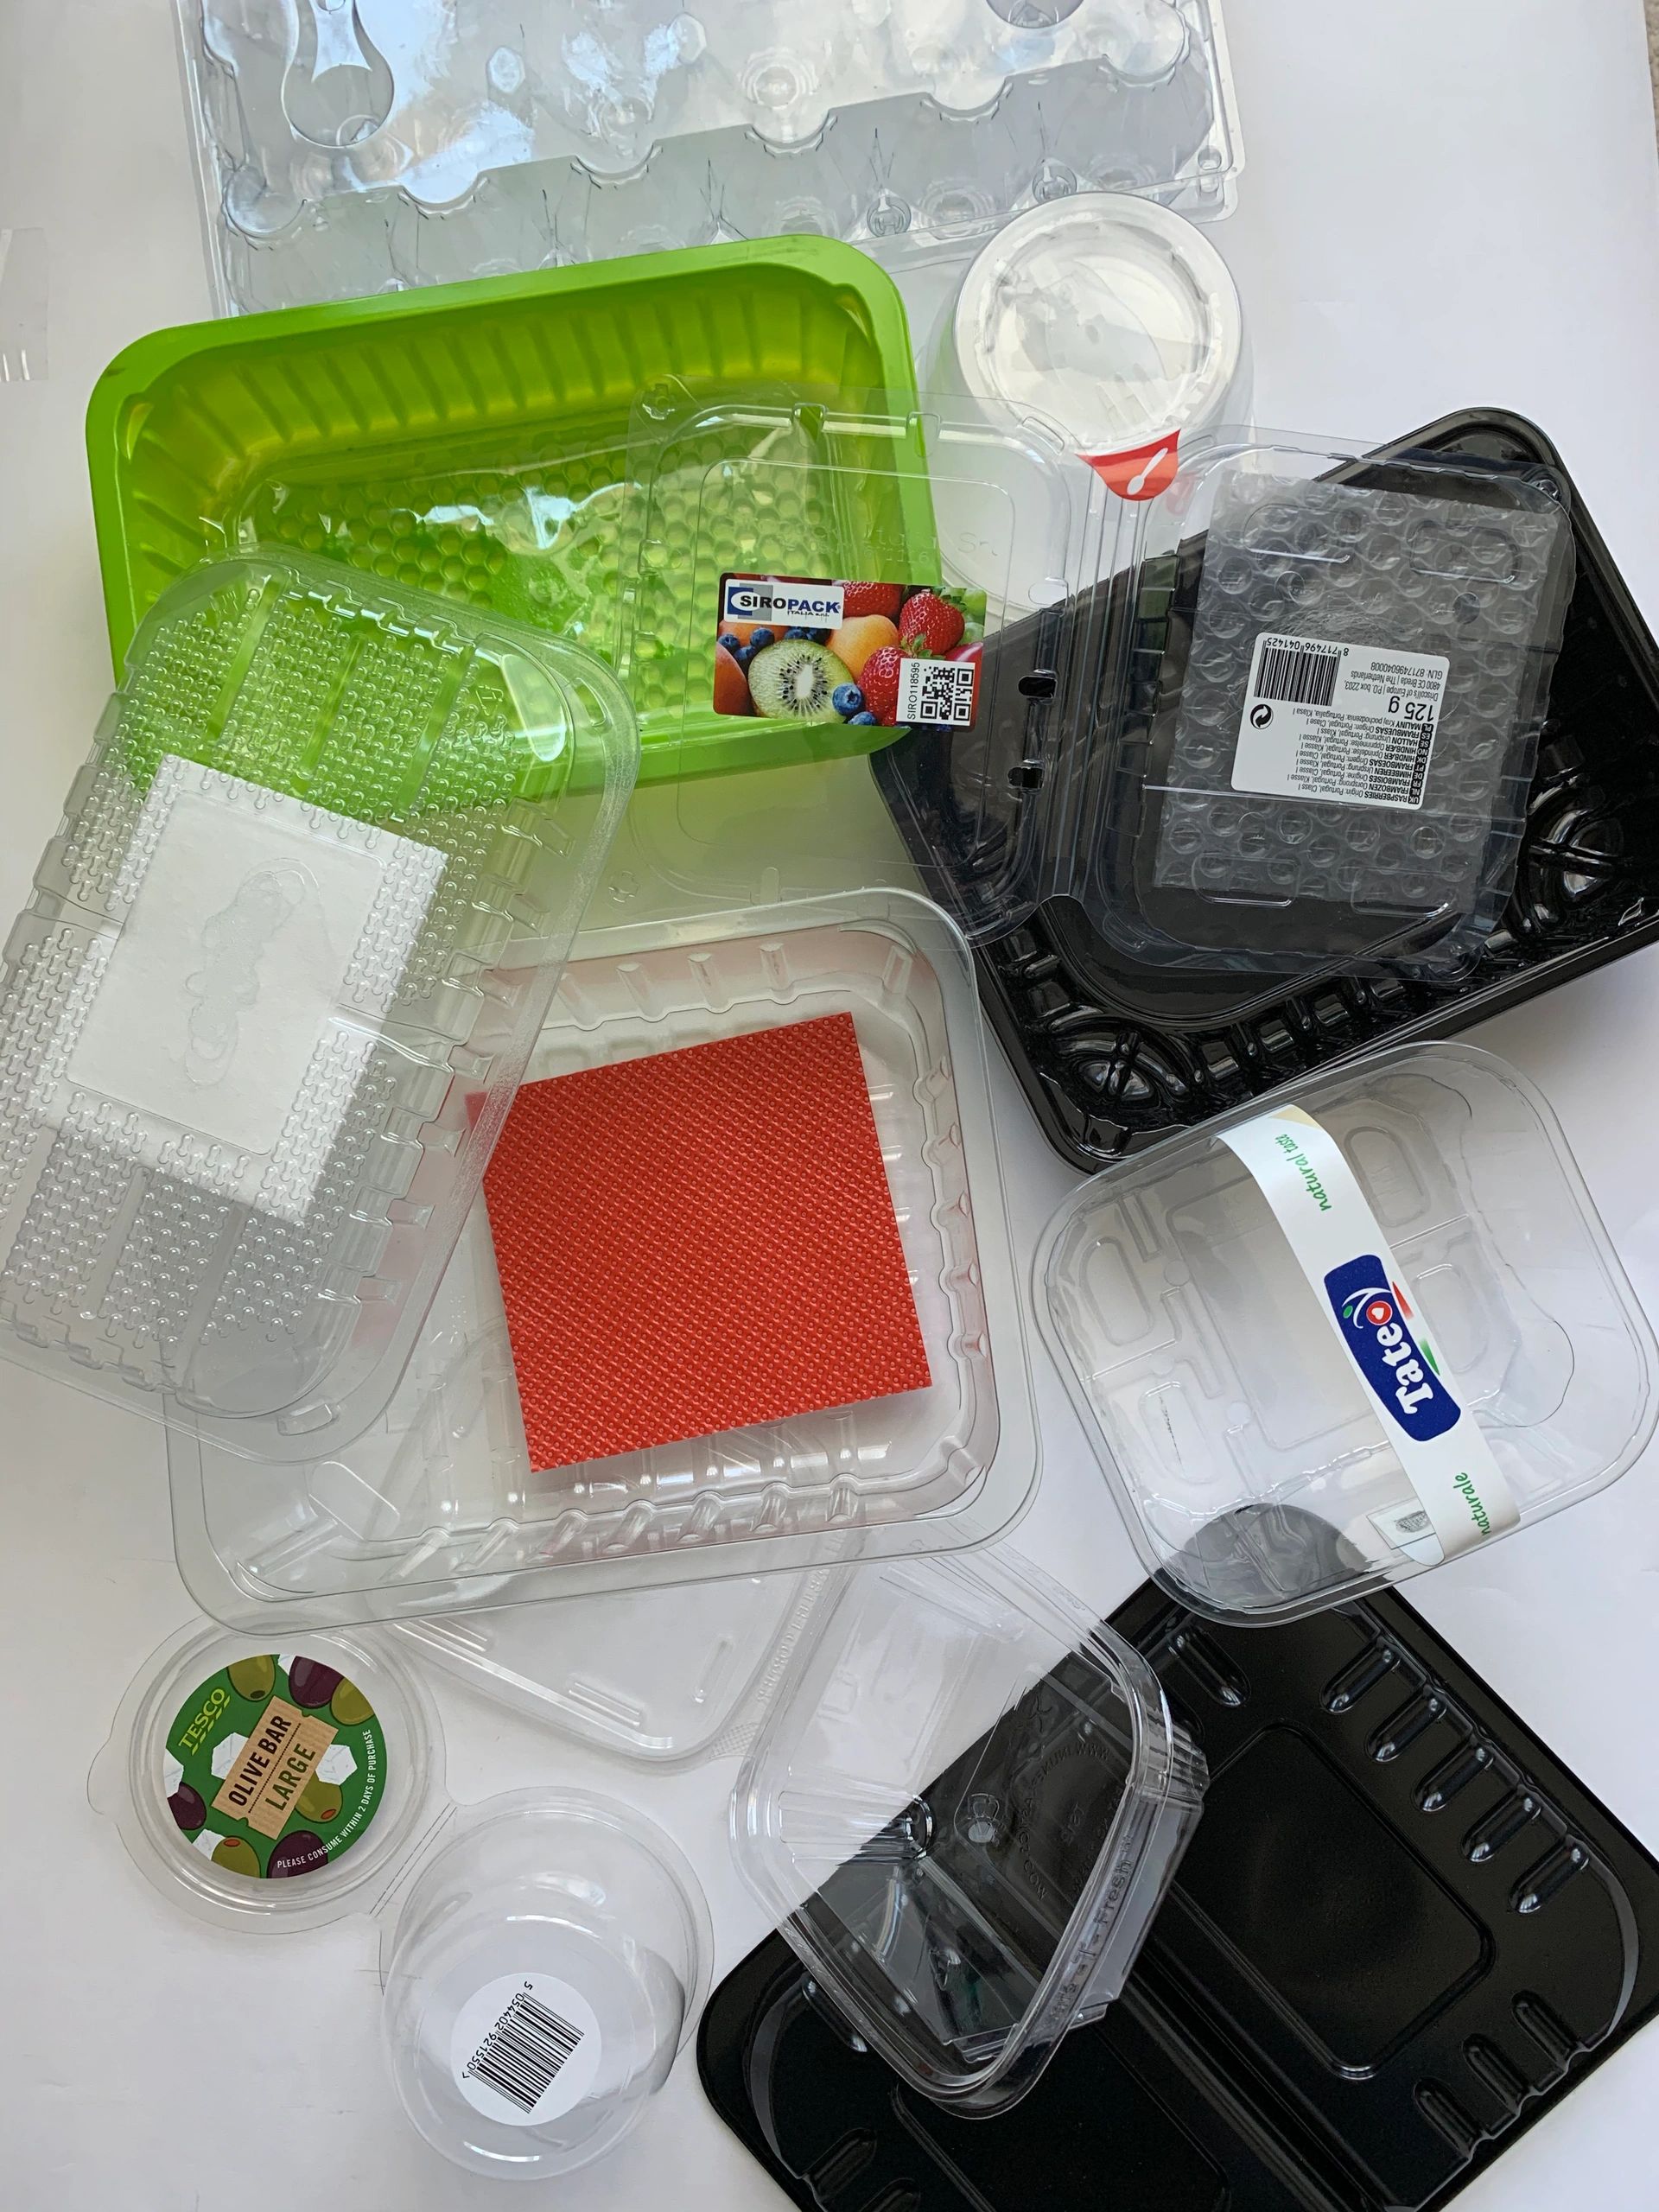 Thermoformed containers for food packaging